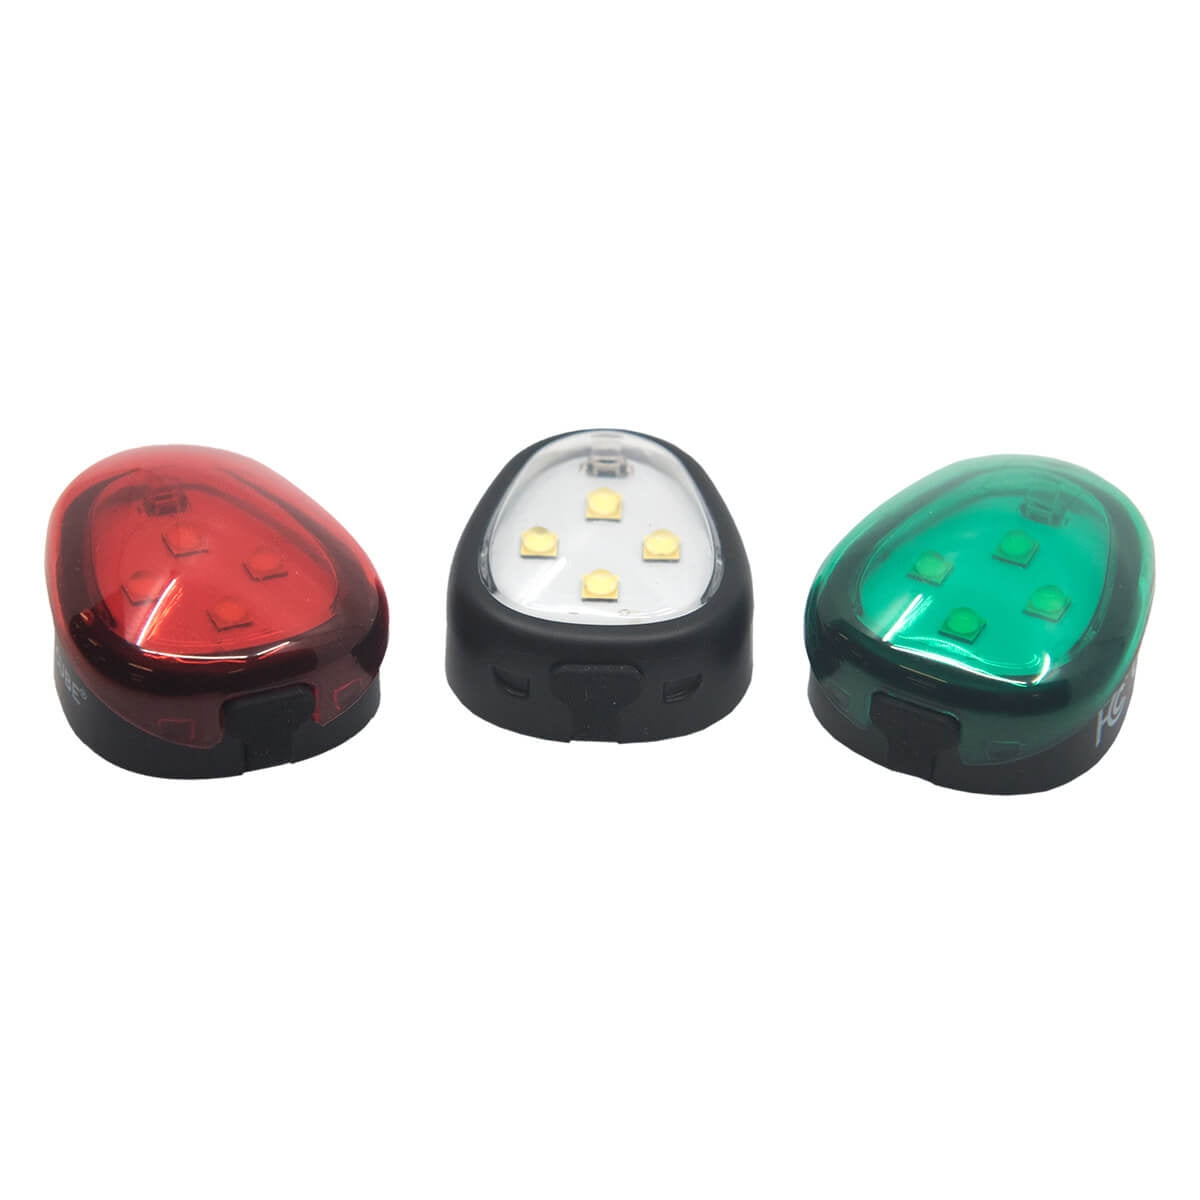 Lume Cube Strobe Anti Collision Light for Drones 3-Pack